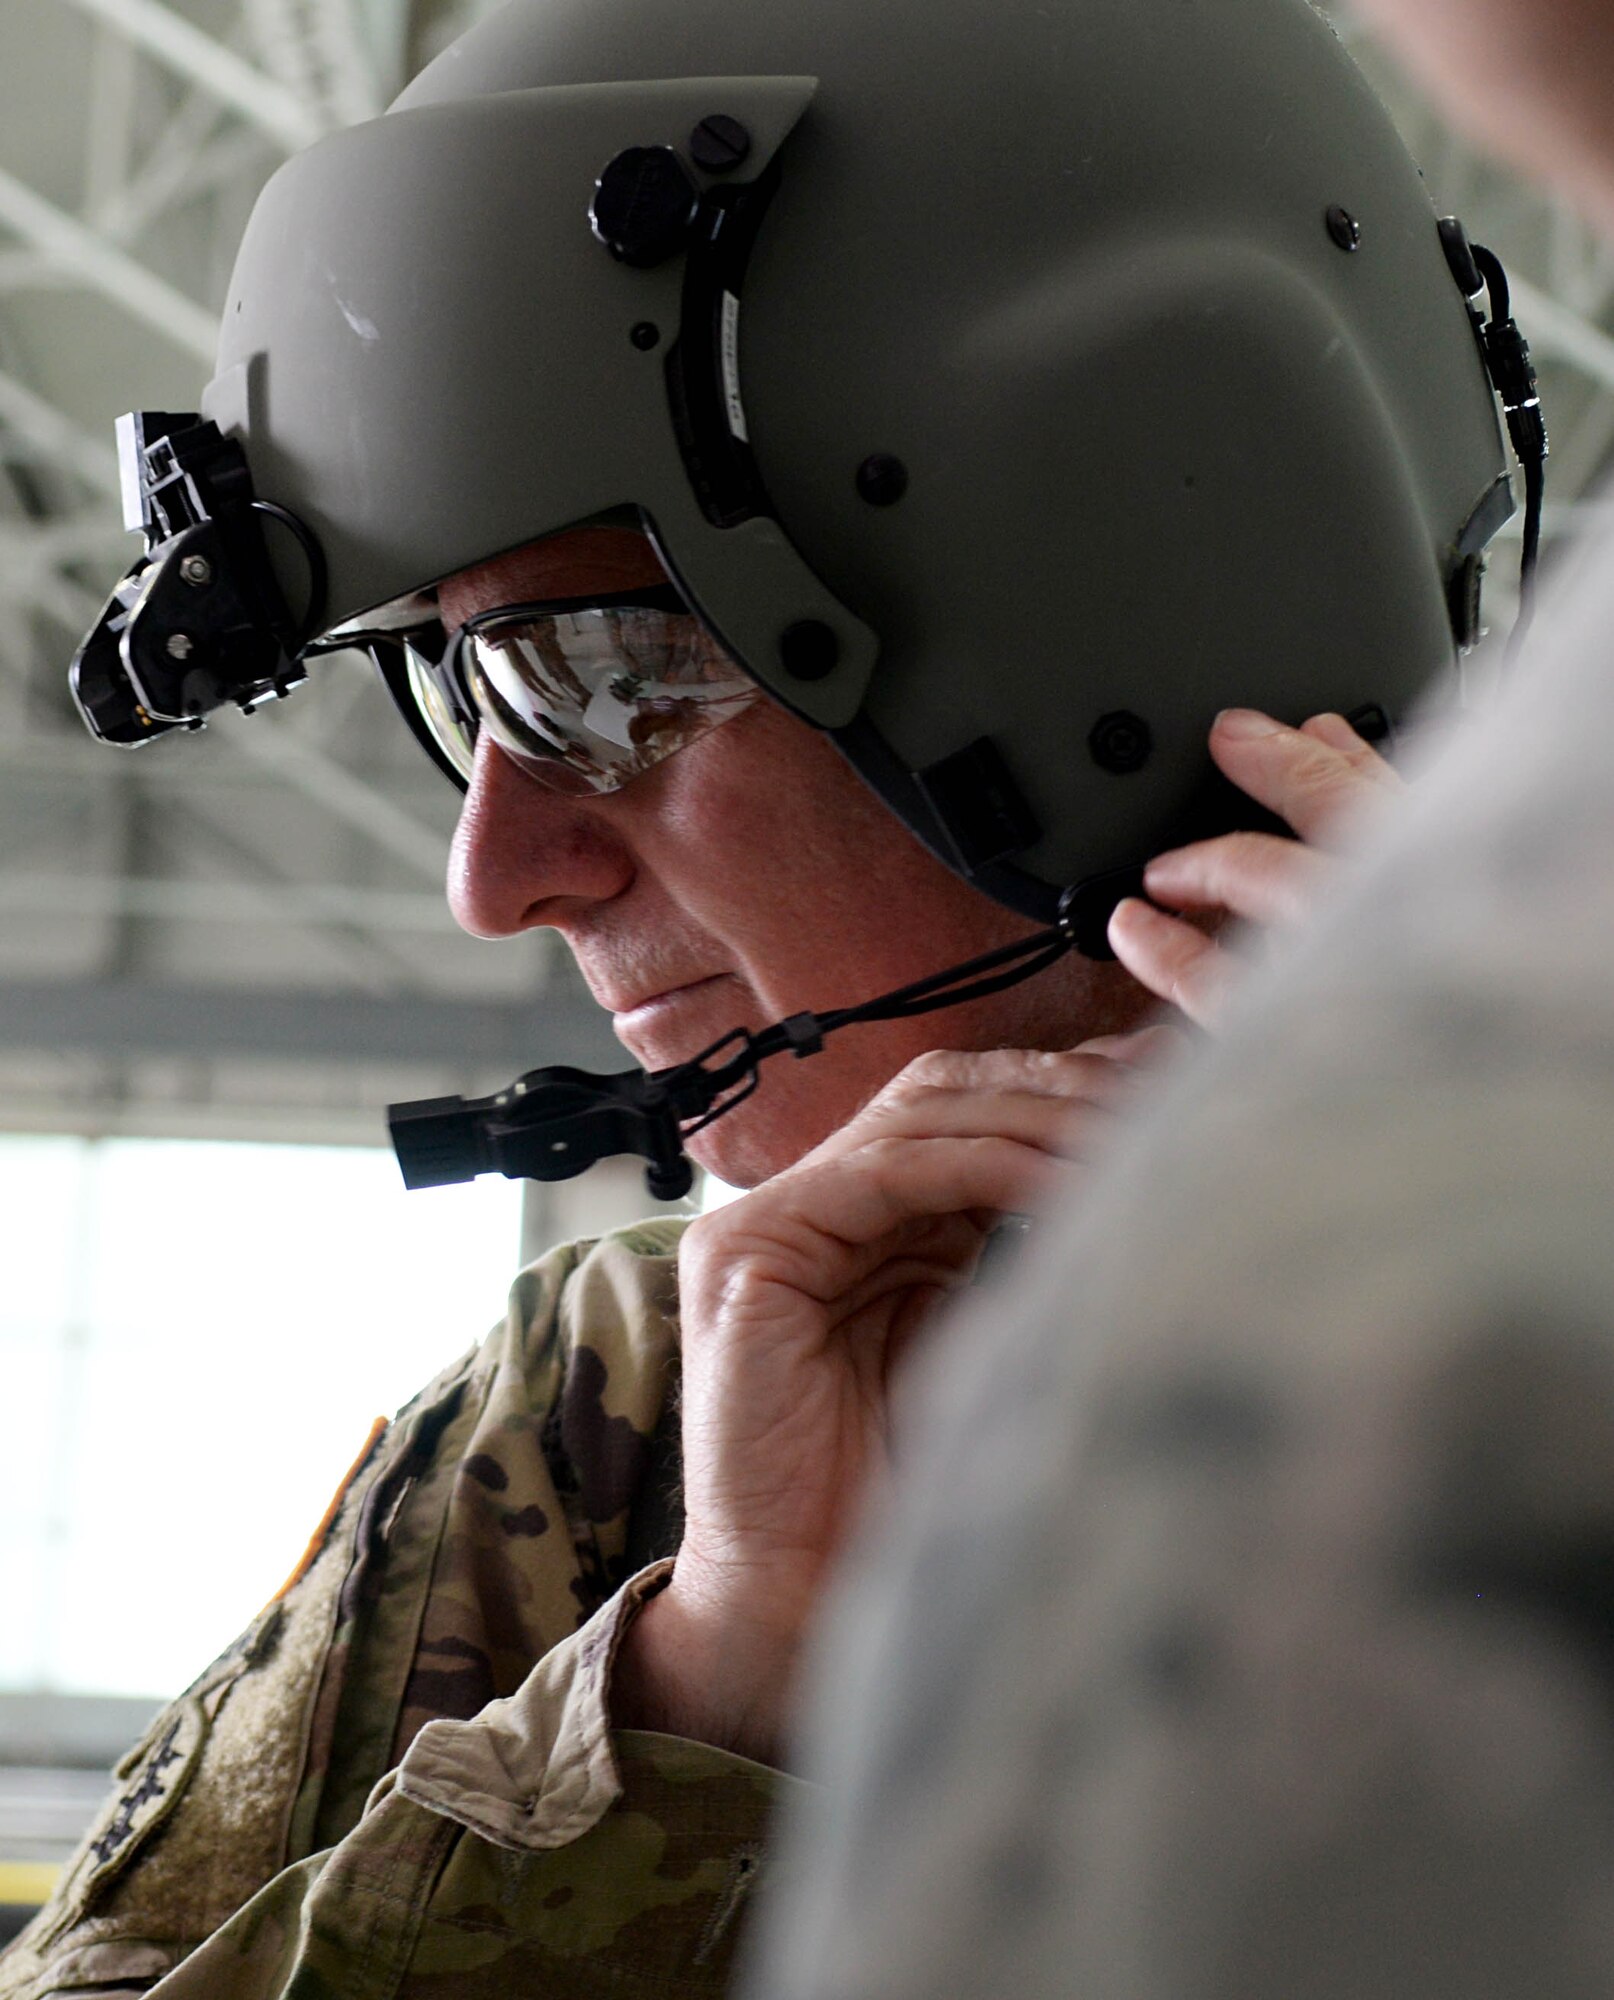 U.S. Army Maj. Gen. Mark C. Schwartz, commander of the Special Operations Command-Europe, prepares for a flight Aug. 1, 2016, on RAF Mildenhall, England. The flight was the capstone of his visit with the 352nd Special Operations Wing. (U.S. Air Force photo by Airman 1st Class Tenley Long)